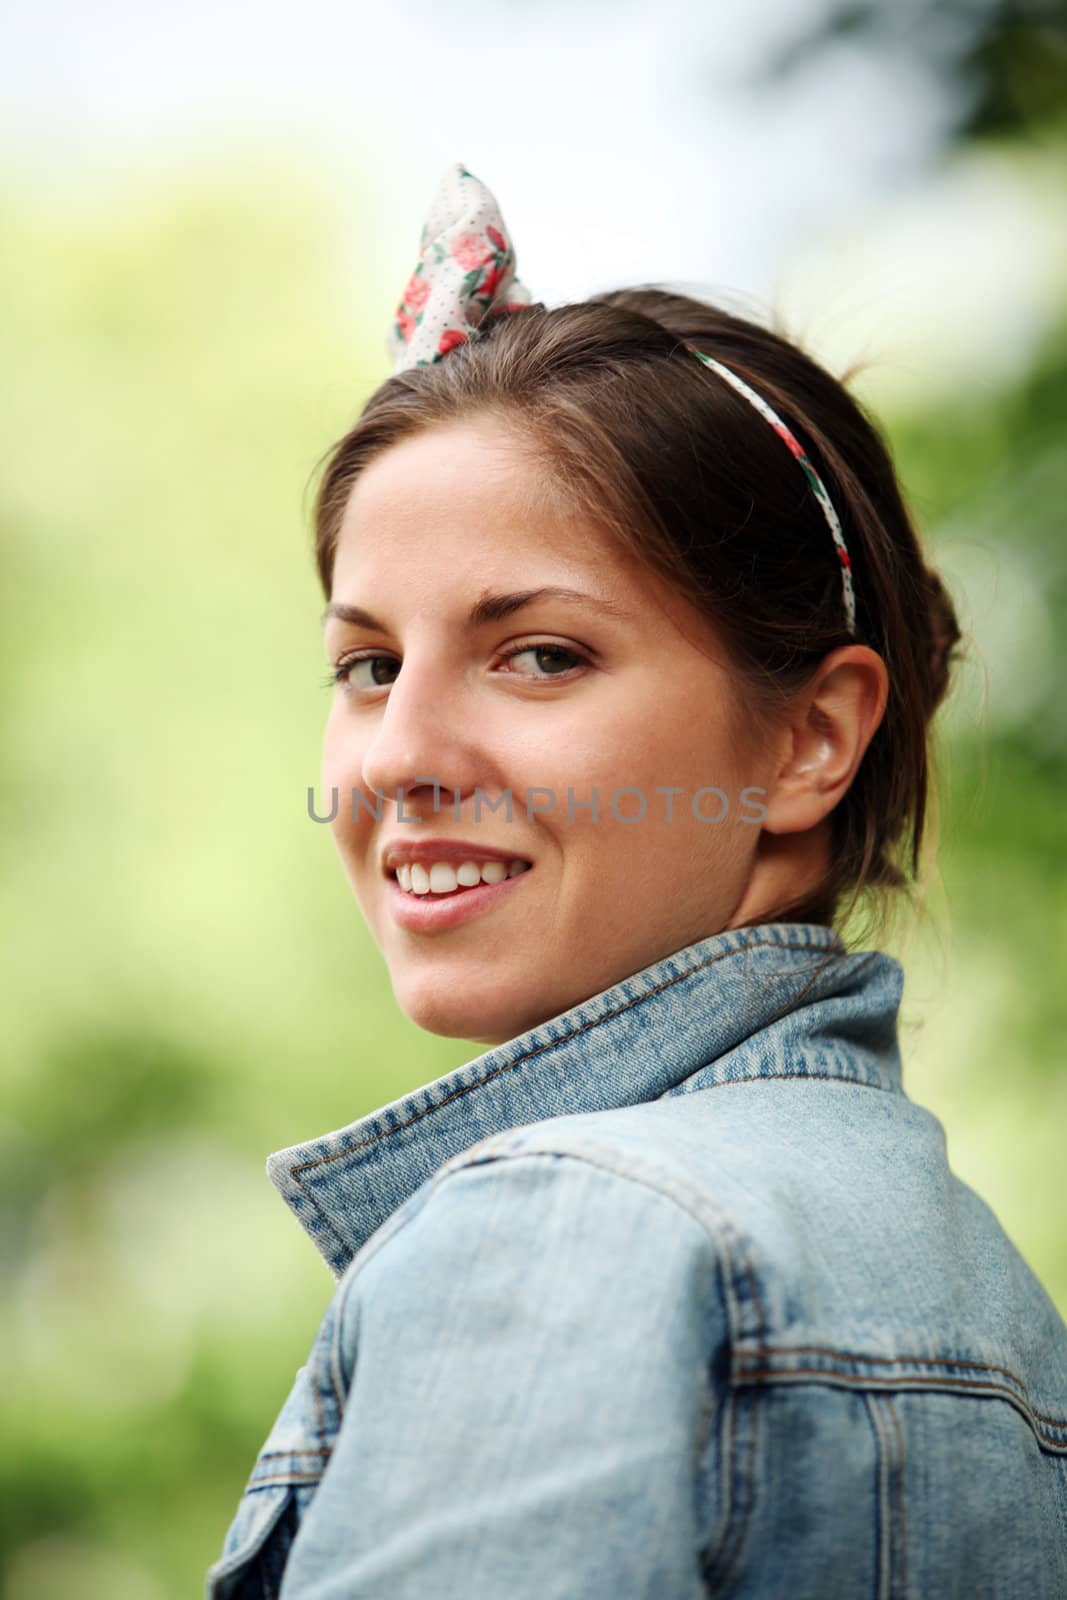 Portrait of young smiling woman in jeans jacket standing in park